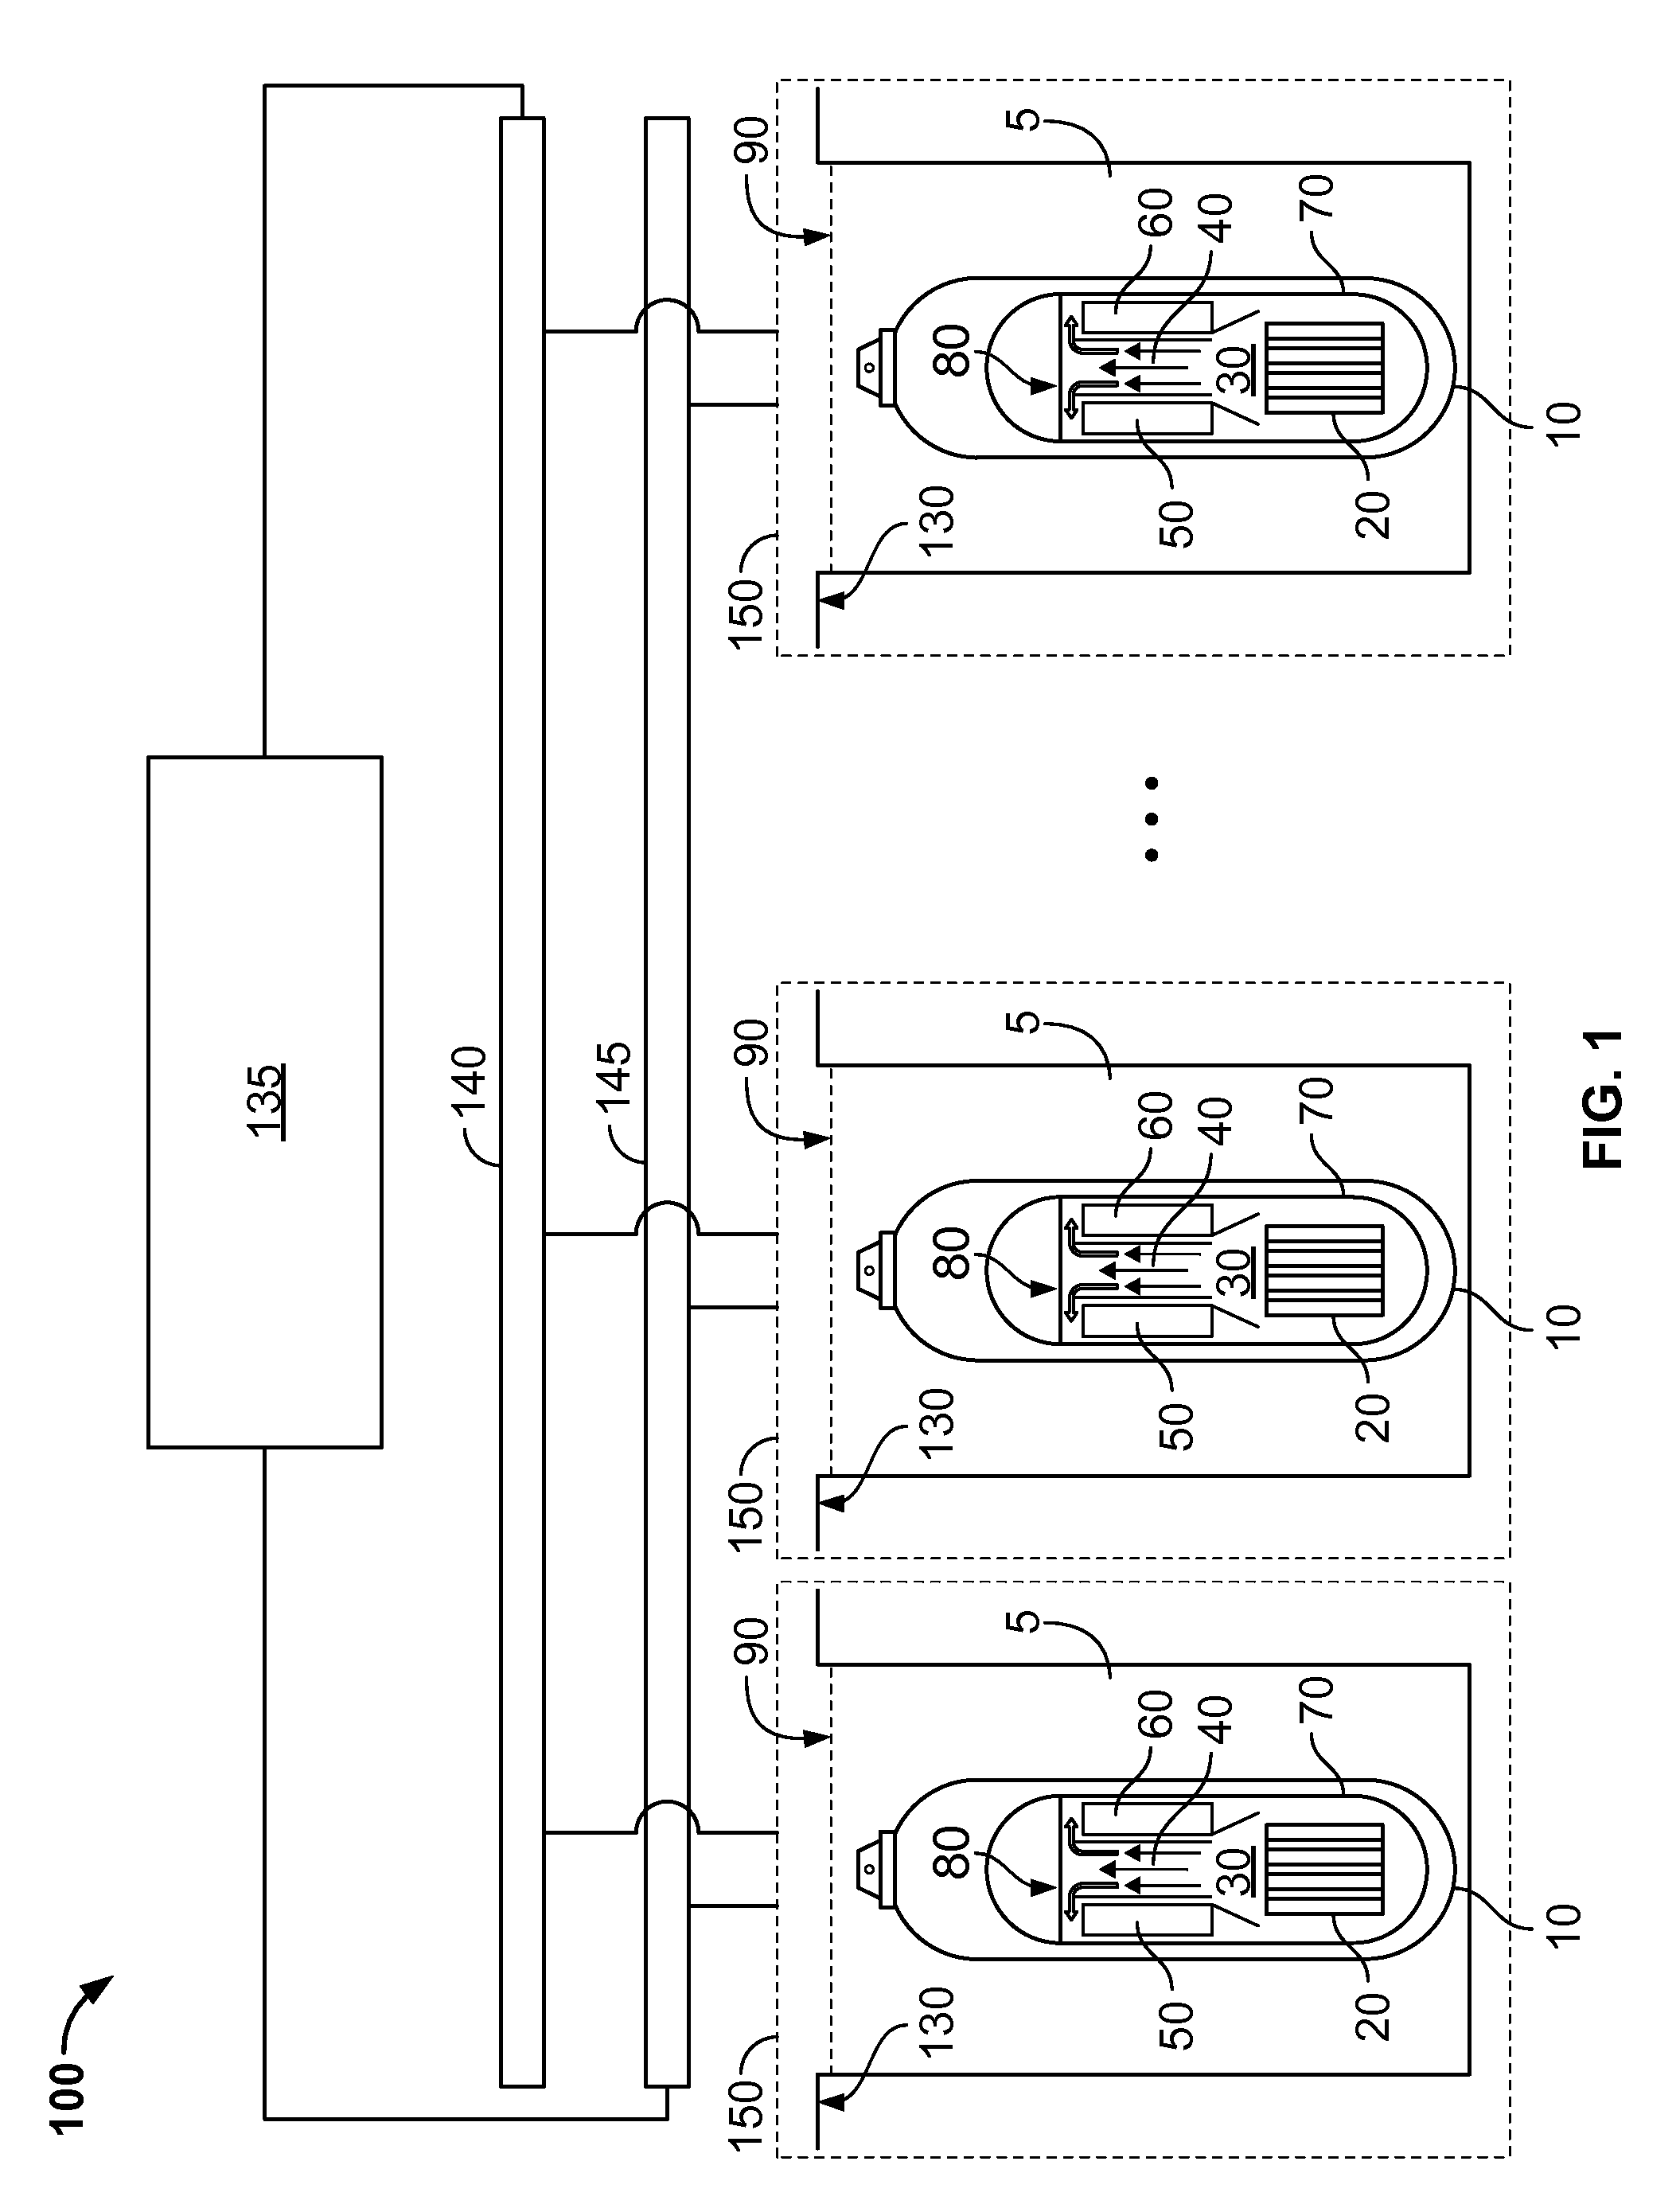 Managing electrical power for a nuclear reactor system